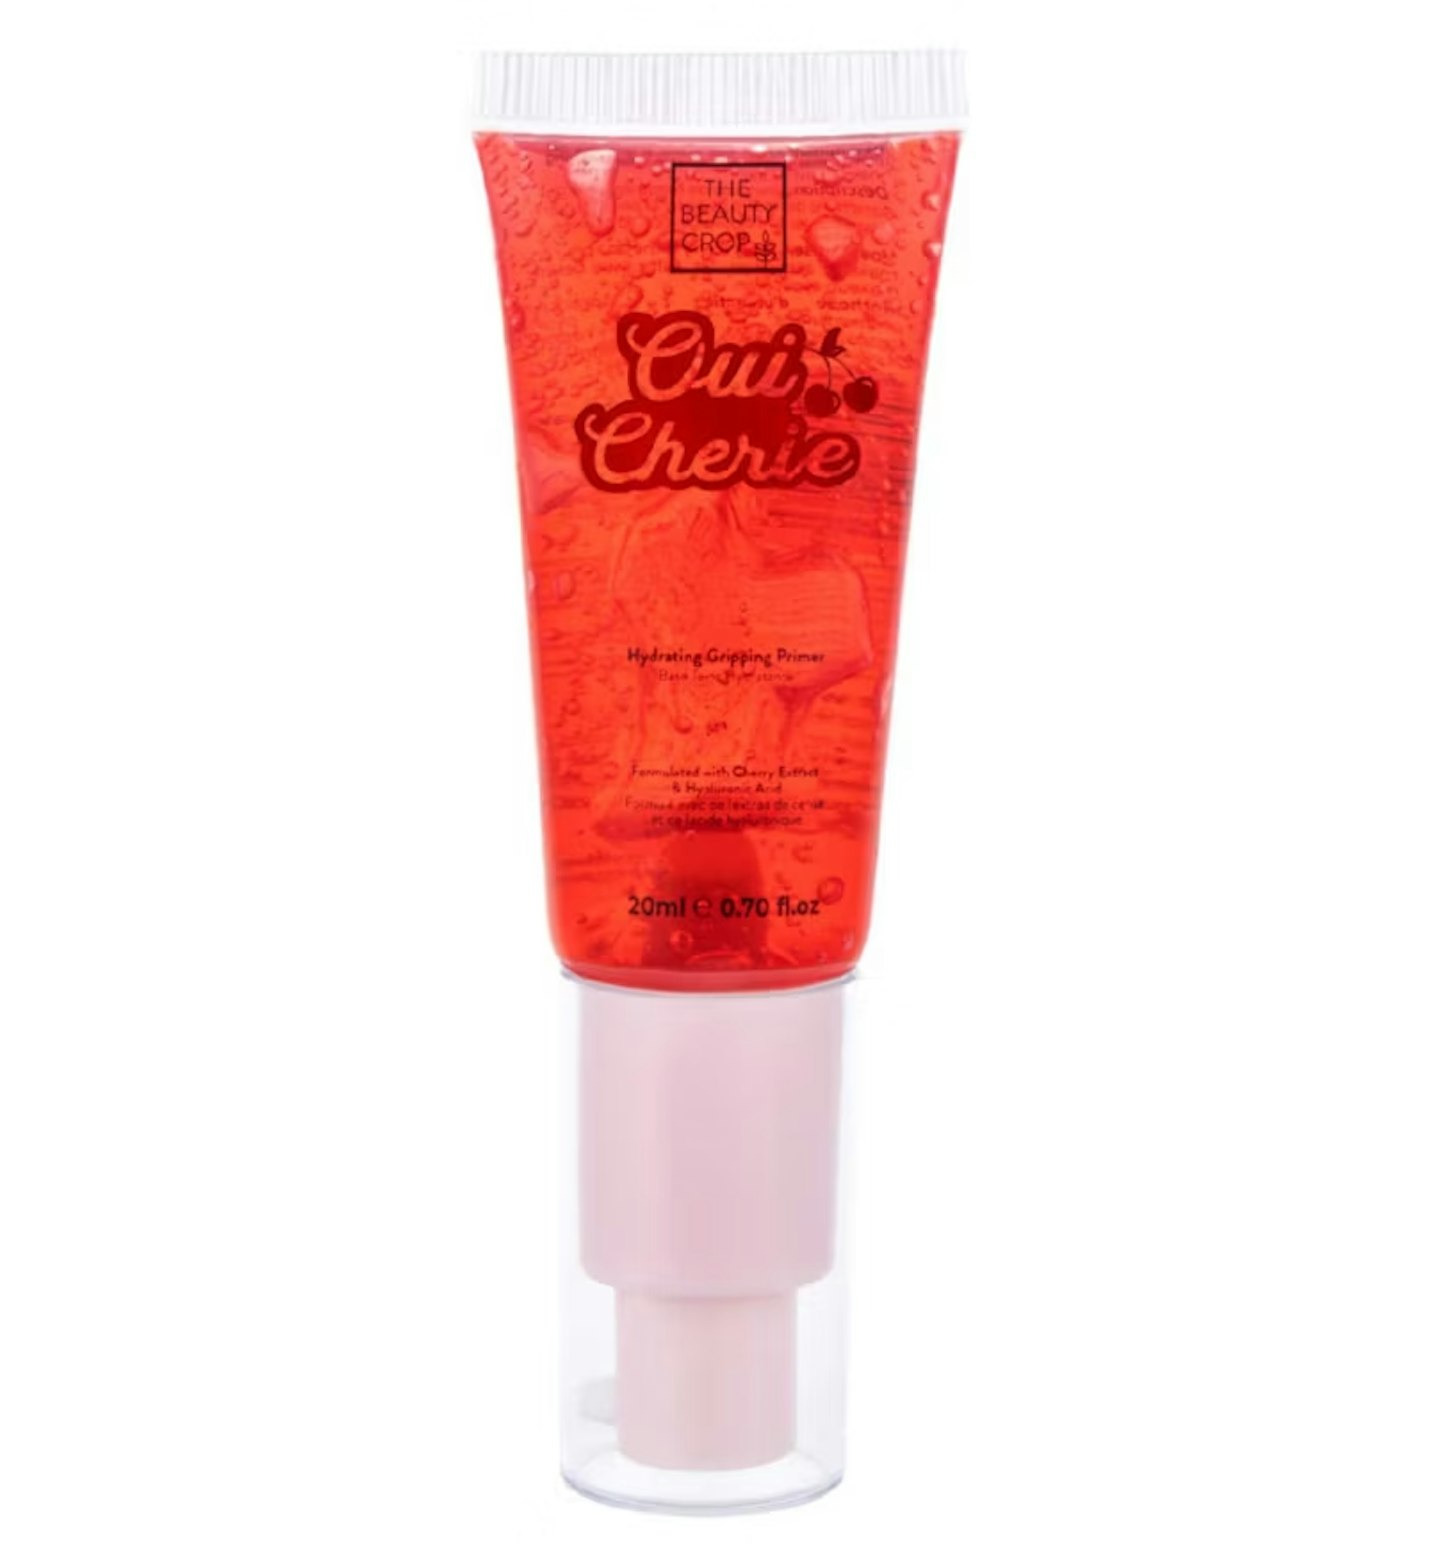 The Beauty Crop Oui Cherie Hydrating Gripping Primer 